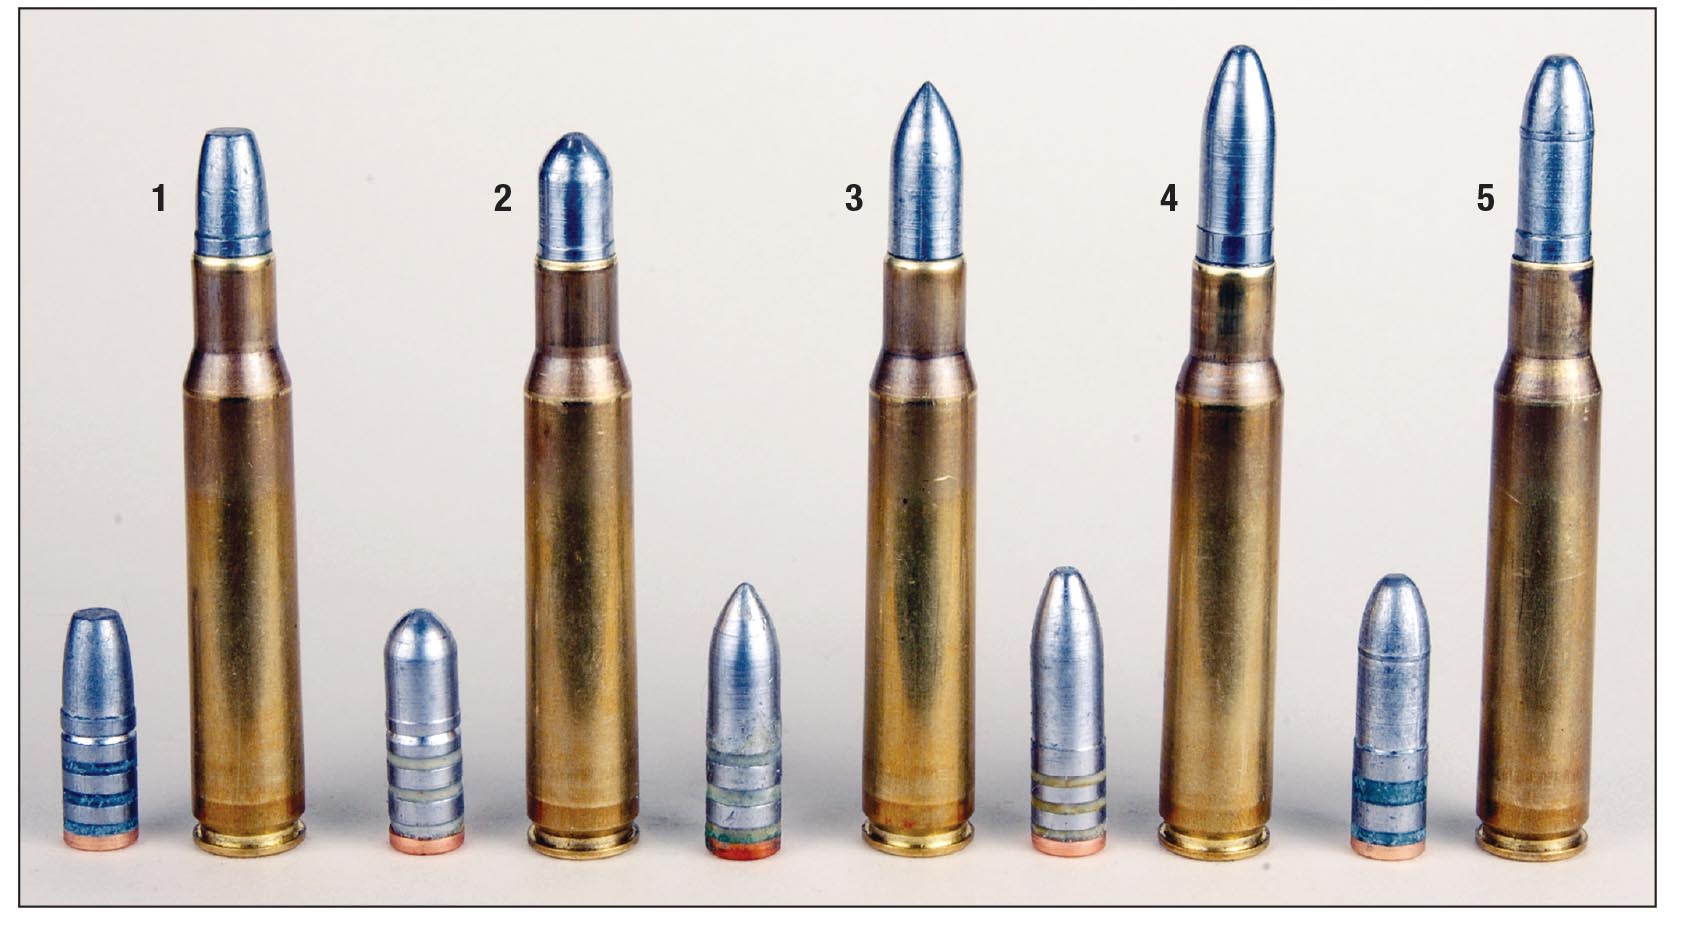 The cast bullets and loaded .30-06 rounds used in most of Mike’s experimenting for ’03/’03A3 rifles include (1) Laser Cast 170-grain FN, (2) 170 Lyman 311291 RN, (3) 178 Lyman 311332 SPT, (4) 195 Lyman 311299 RN and a (5) Laser Cast 200-grain RN.